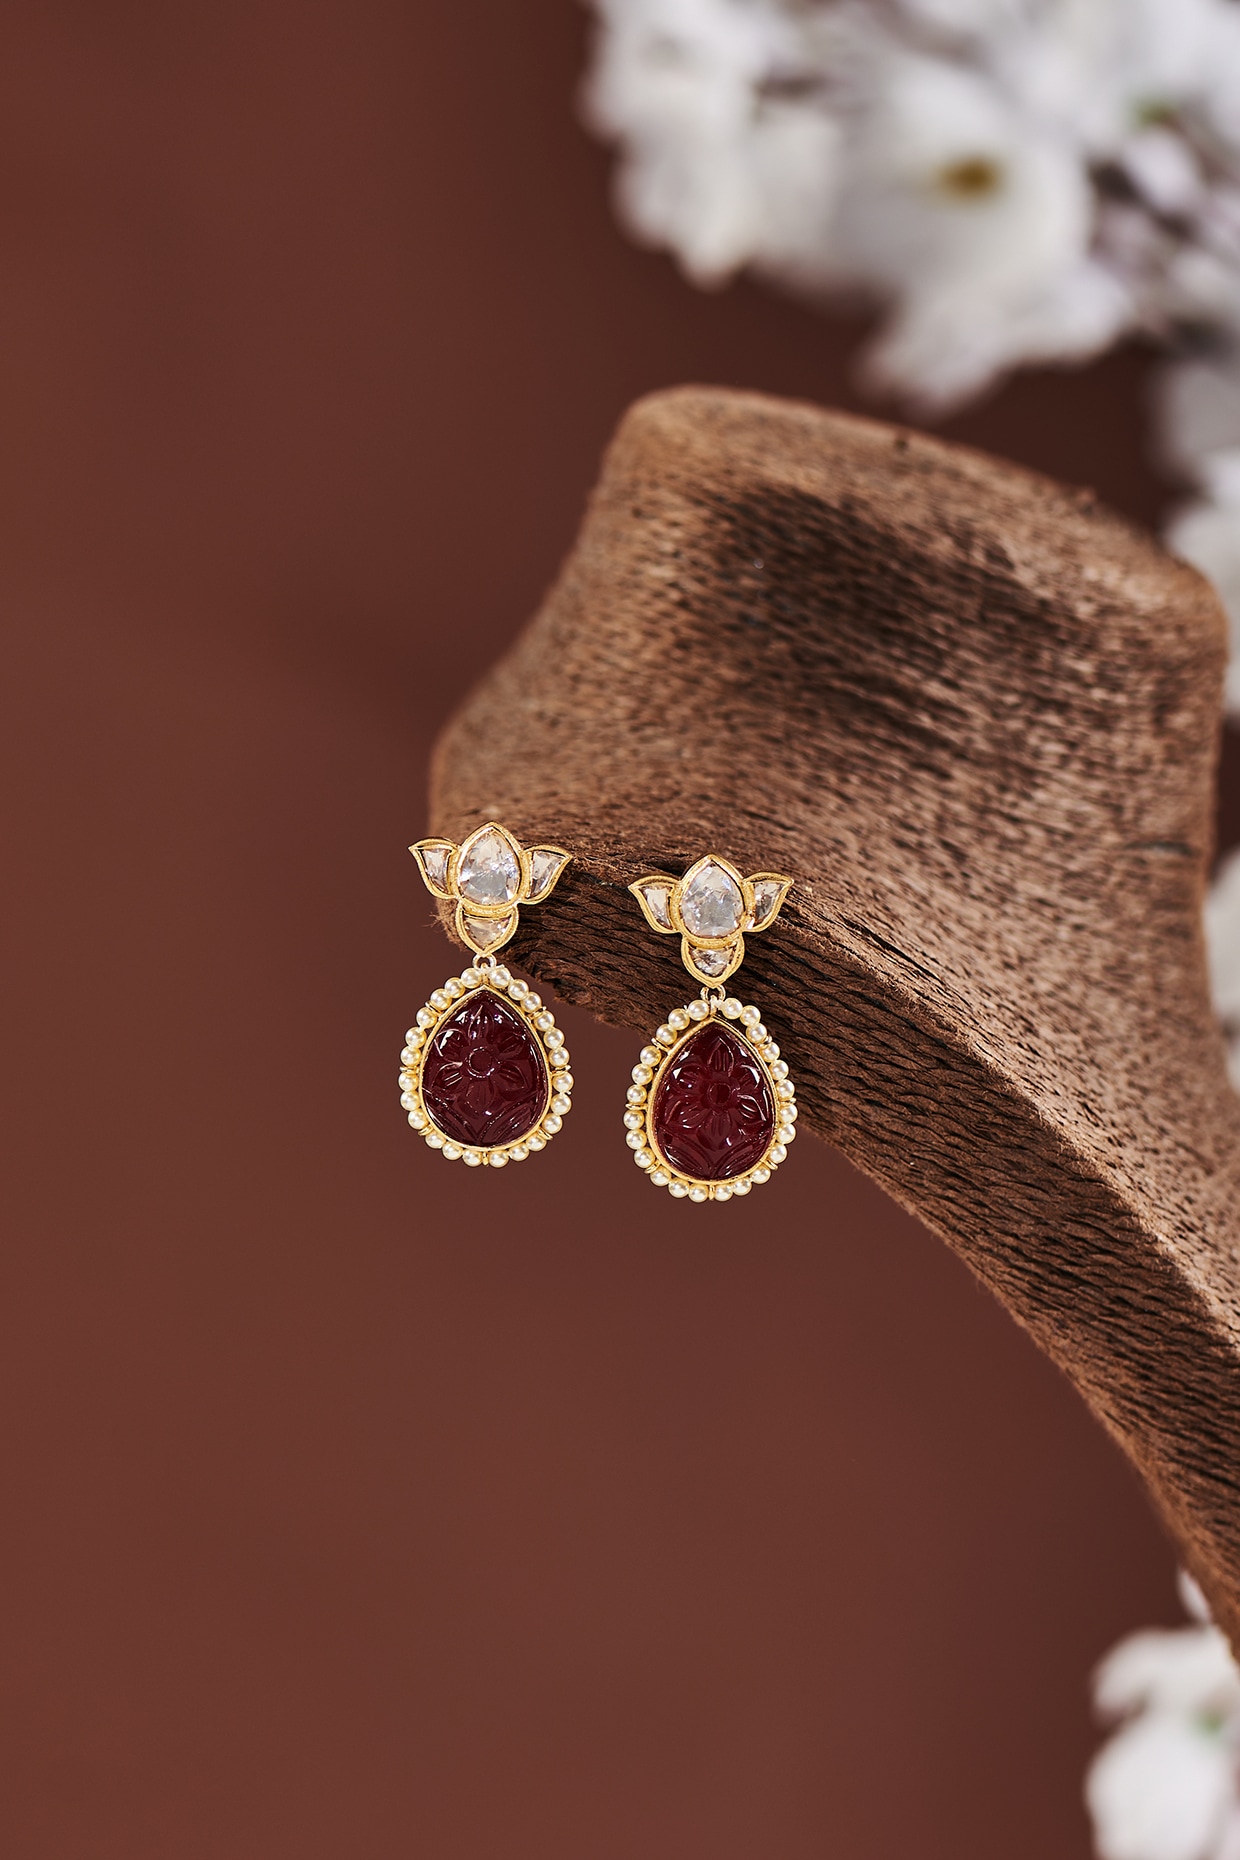 Buy Gold Plated High Quality Ruby Stone Danglers Earrings for Girls